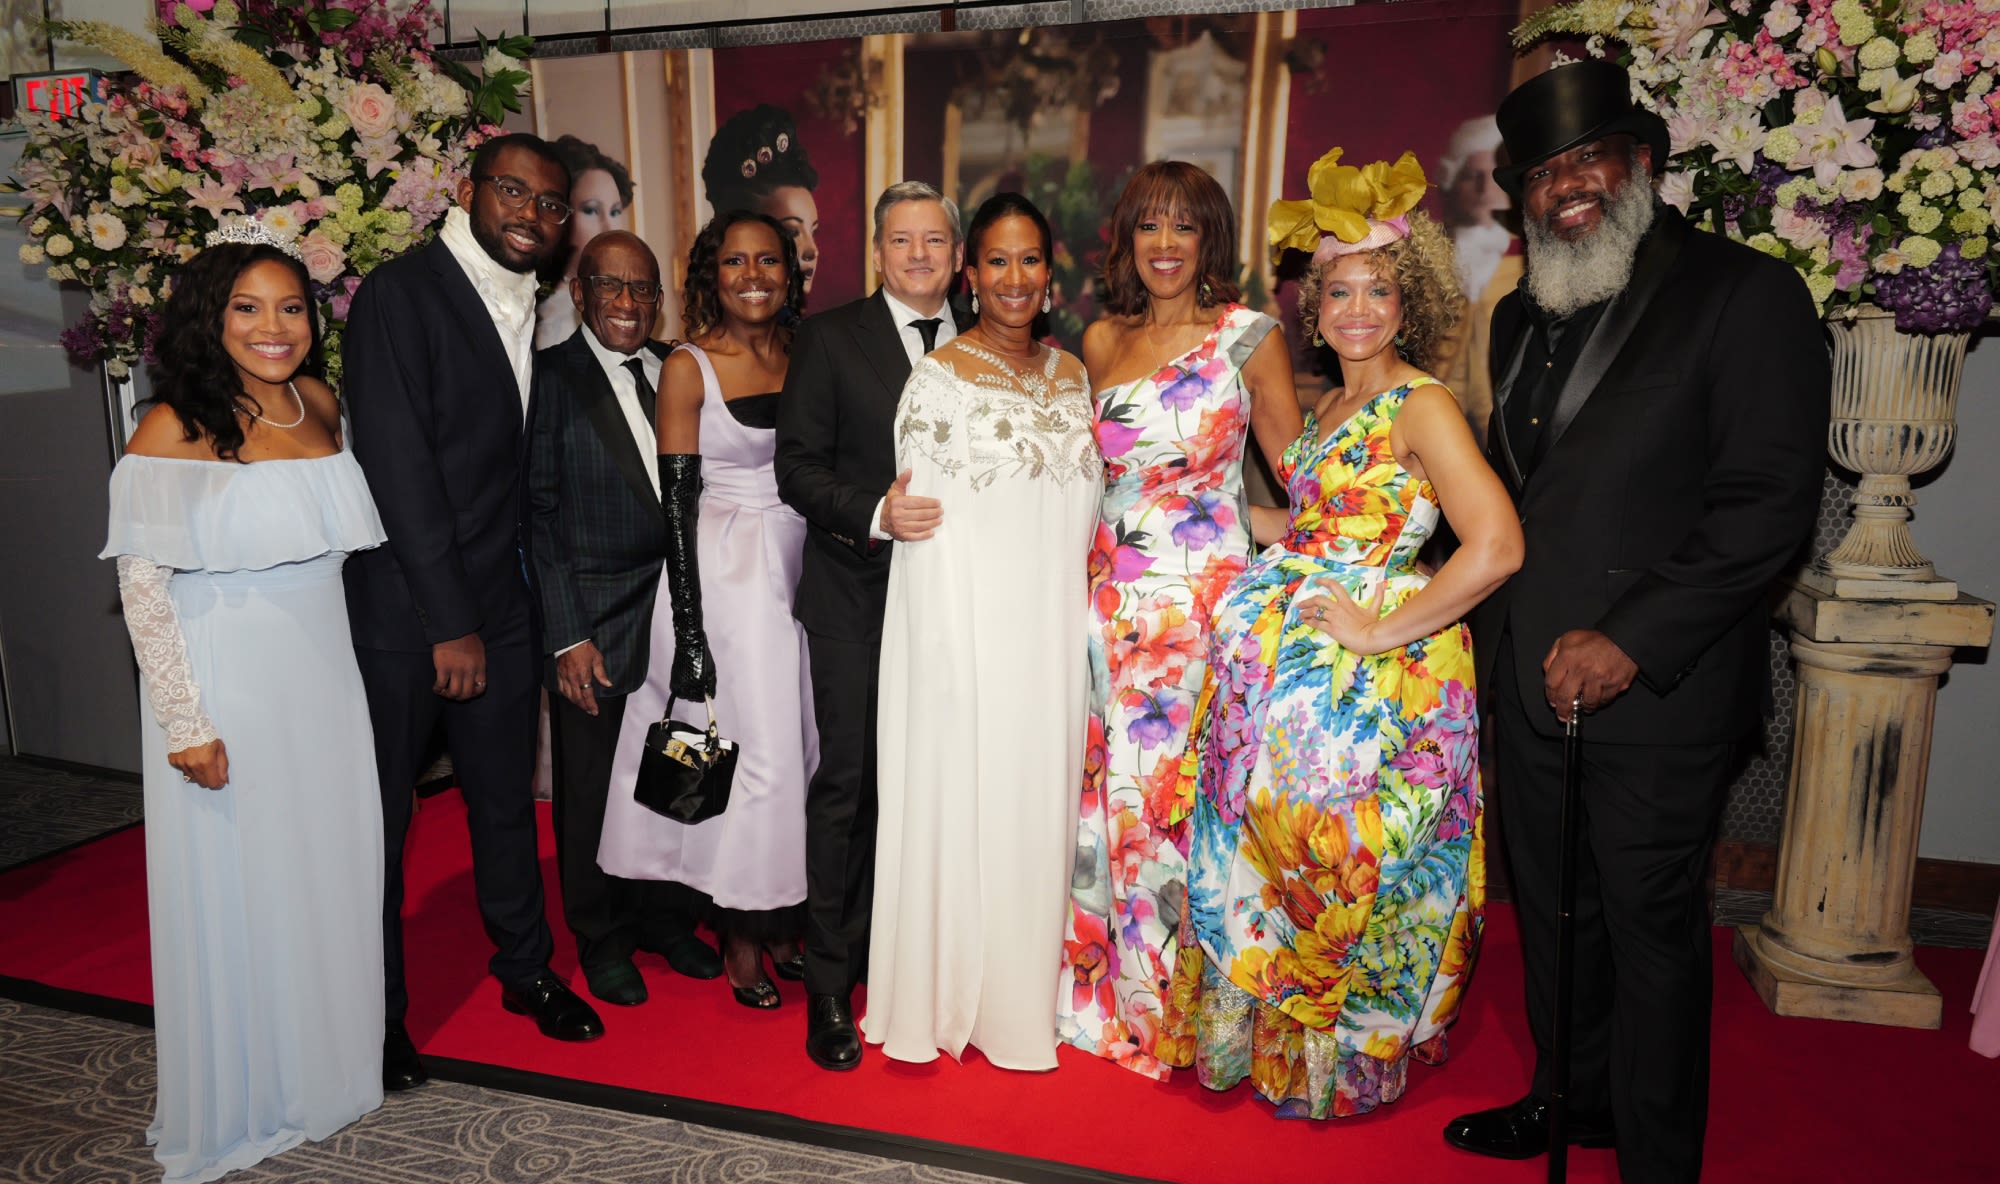 Gayle King, Al Roker and More Celebrate 60 Years of Harlem School of the Arts With ‘Bridgerton’ Themed Charity Gala, $2...